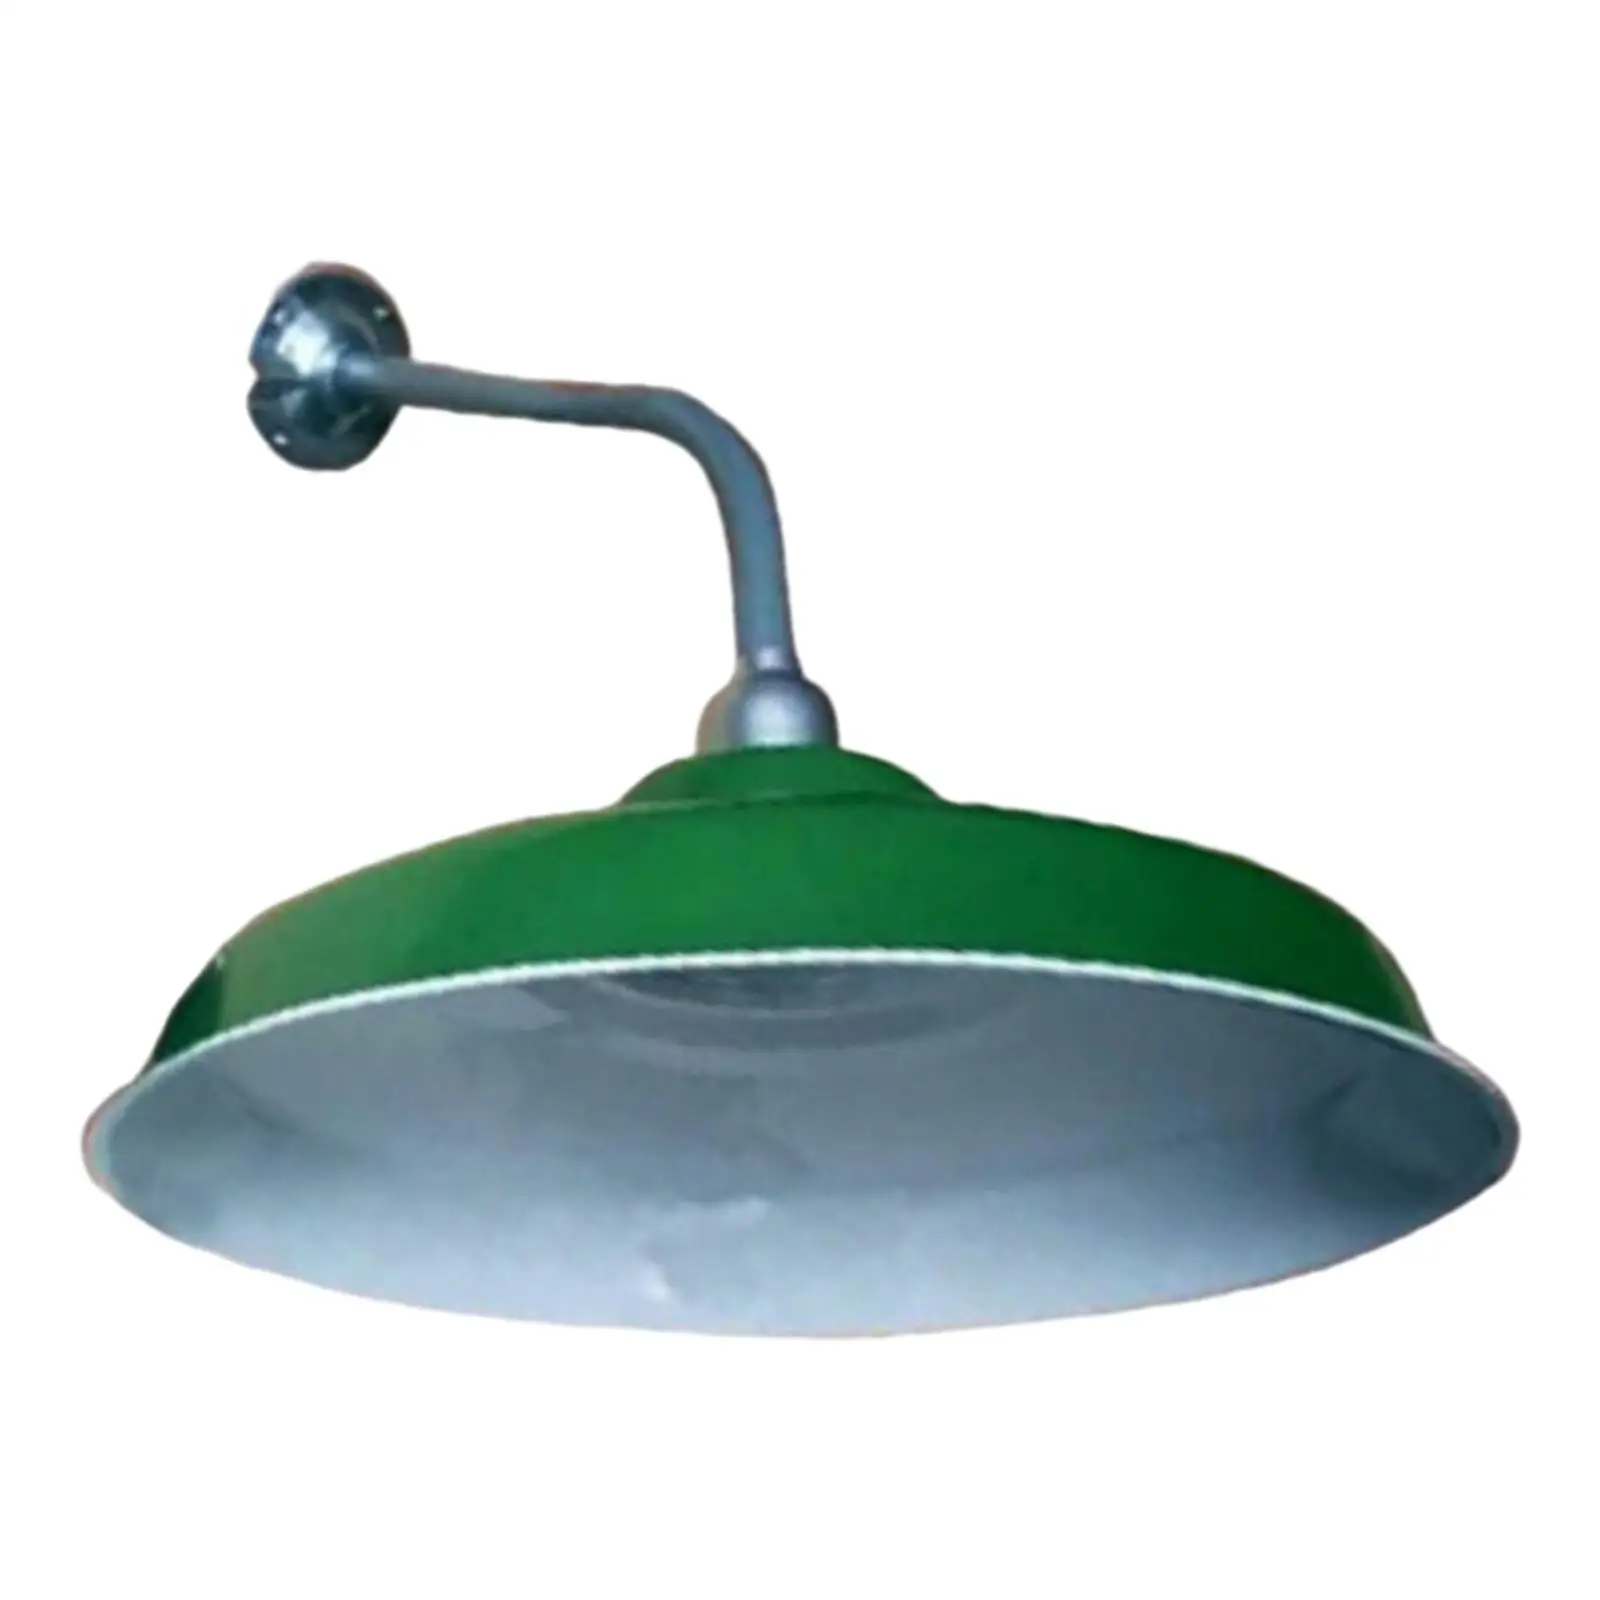 Enamel Ceiling Lamp Cover Shade Green DIY for Farmhouse Kitchen Decorative Versatile Accessory Home Decoration Durable Sturdy